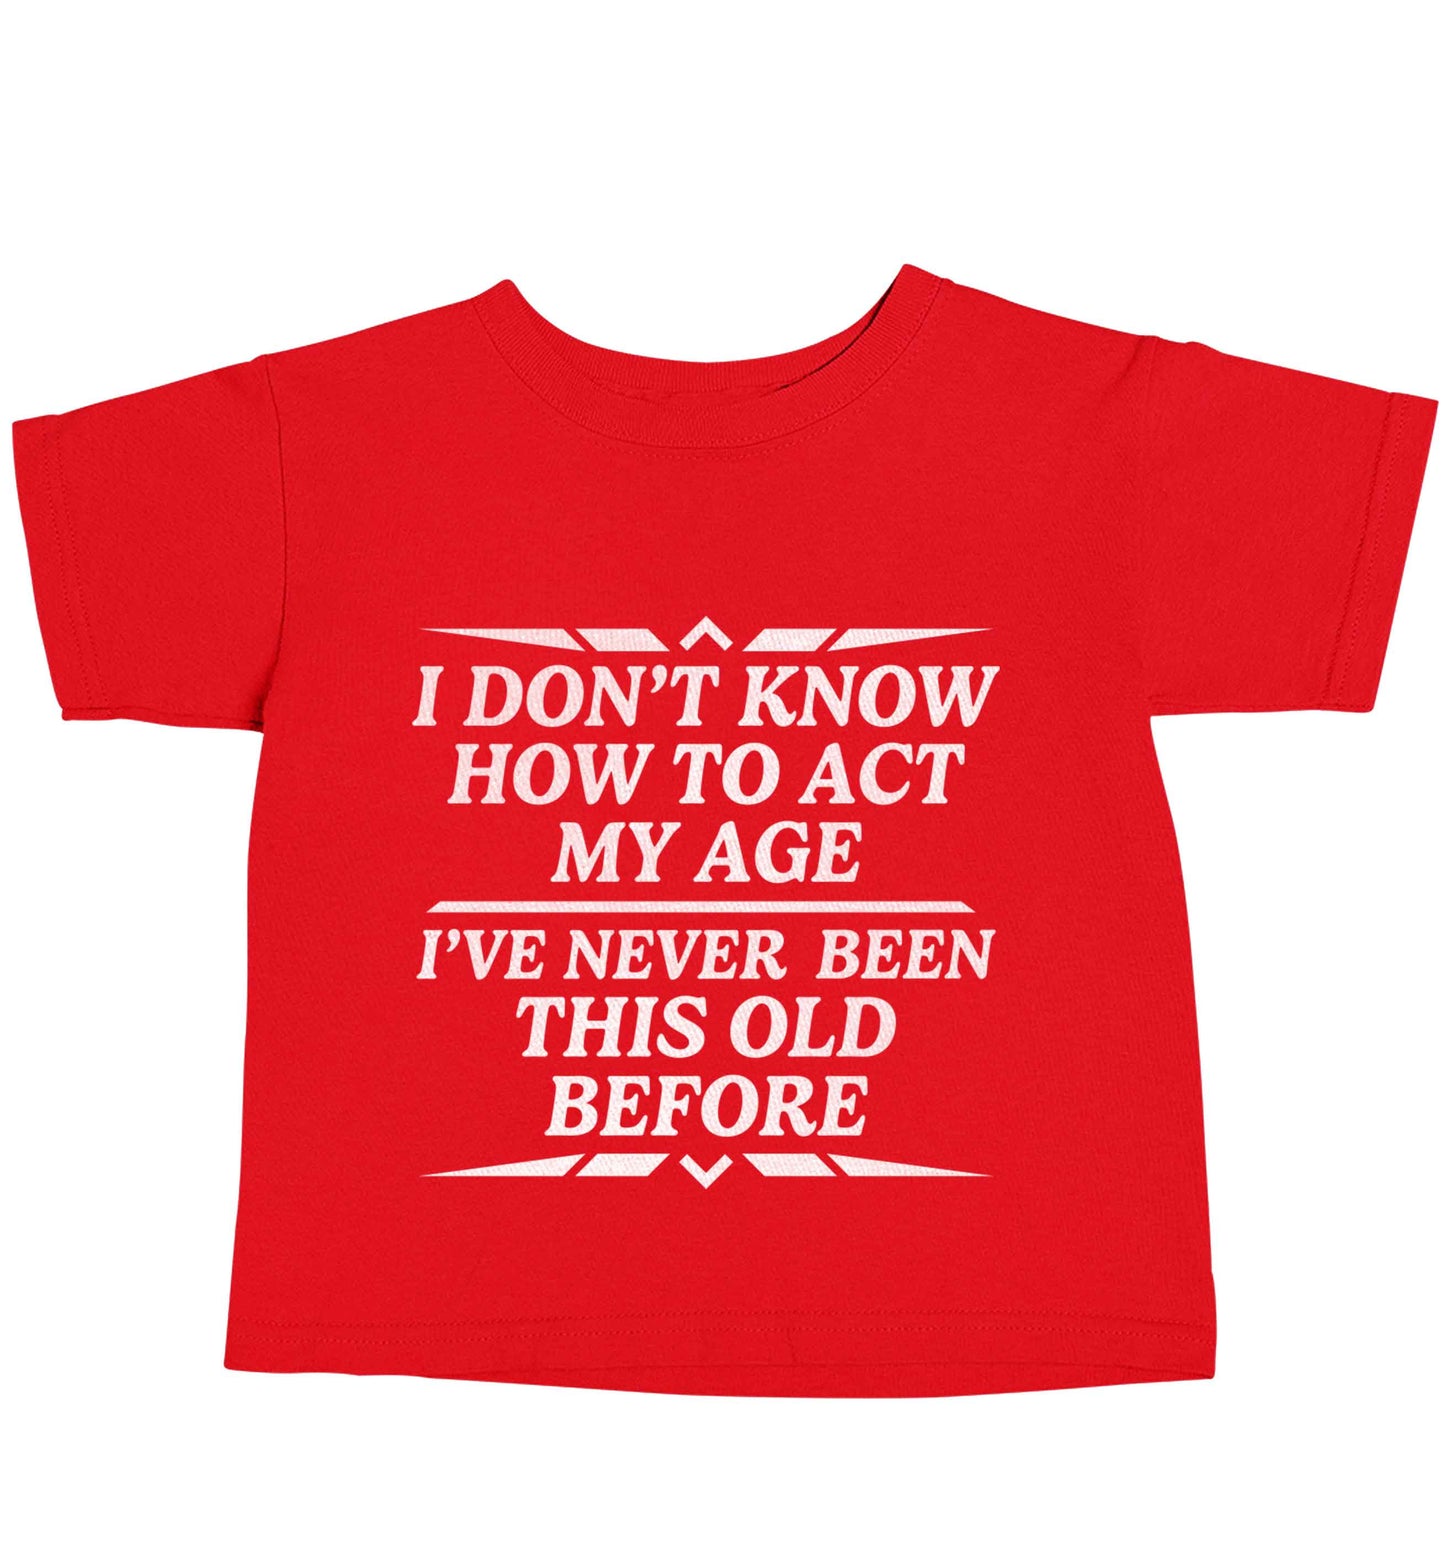 I don't know how to act my age I've never been this old before red baby toddler Tshirt 2 Years